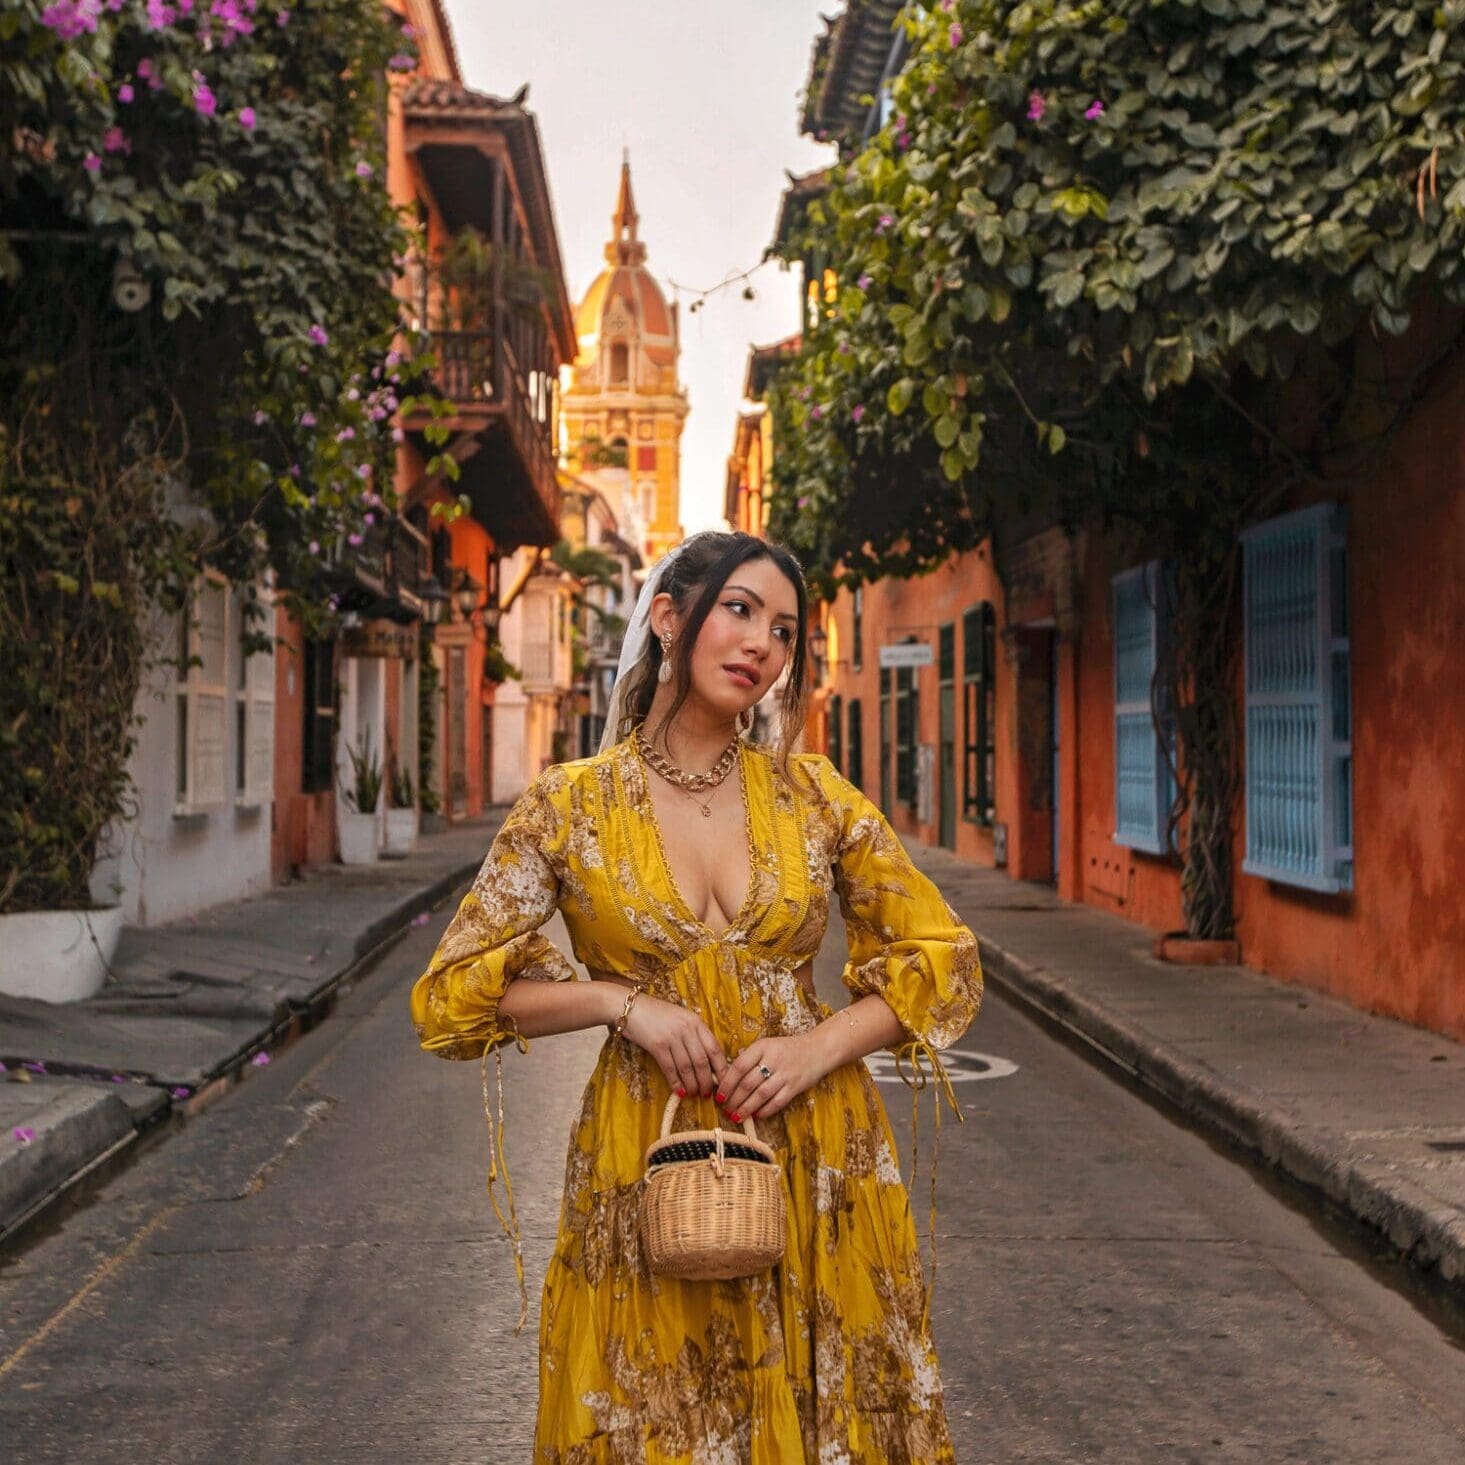 Cartagena-Things-to-do-Instagram-Locations-Old-Town-1